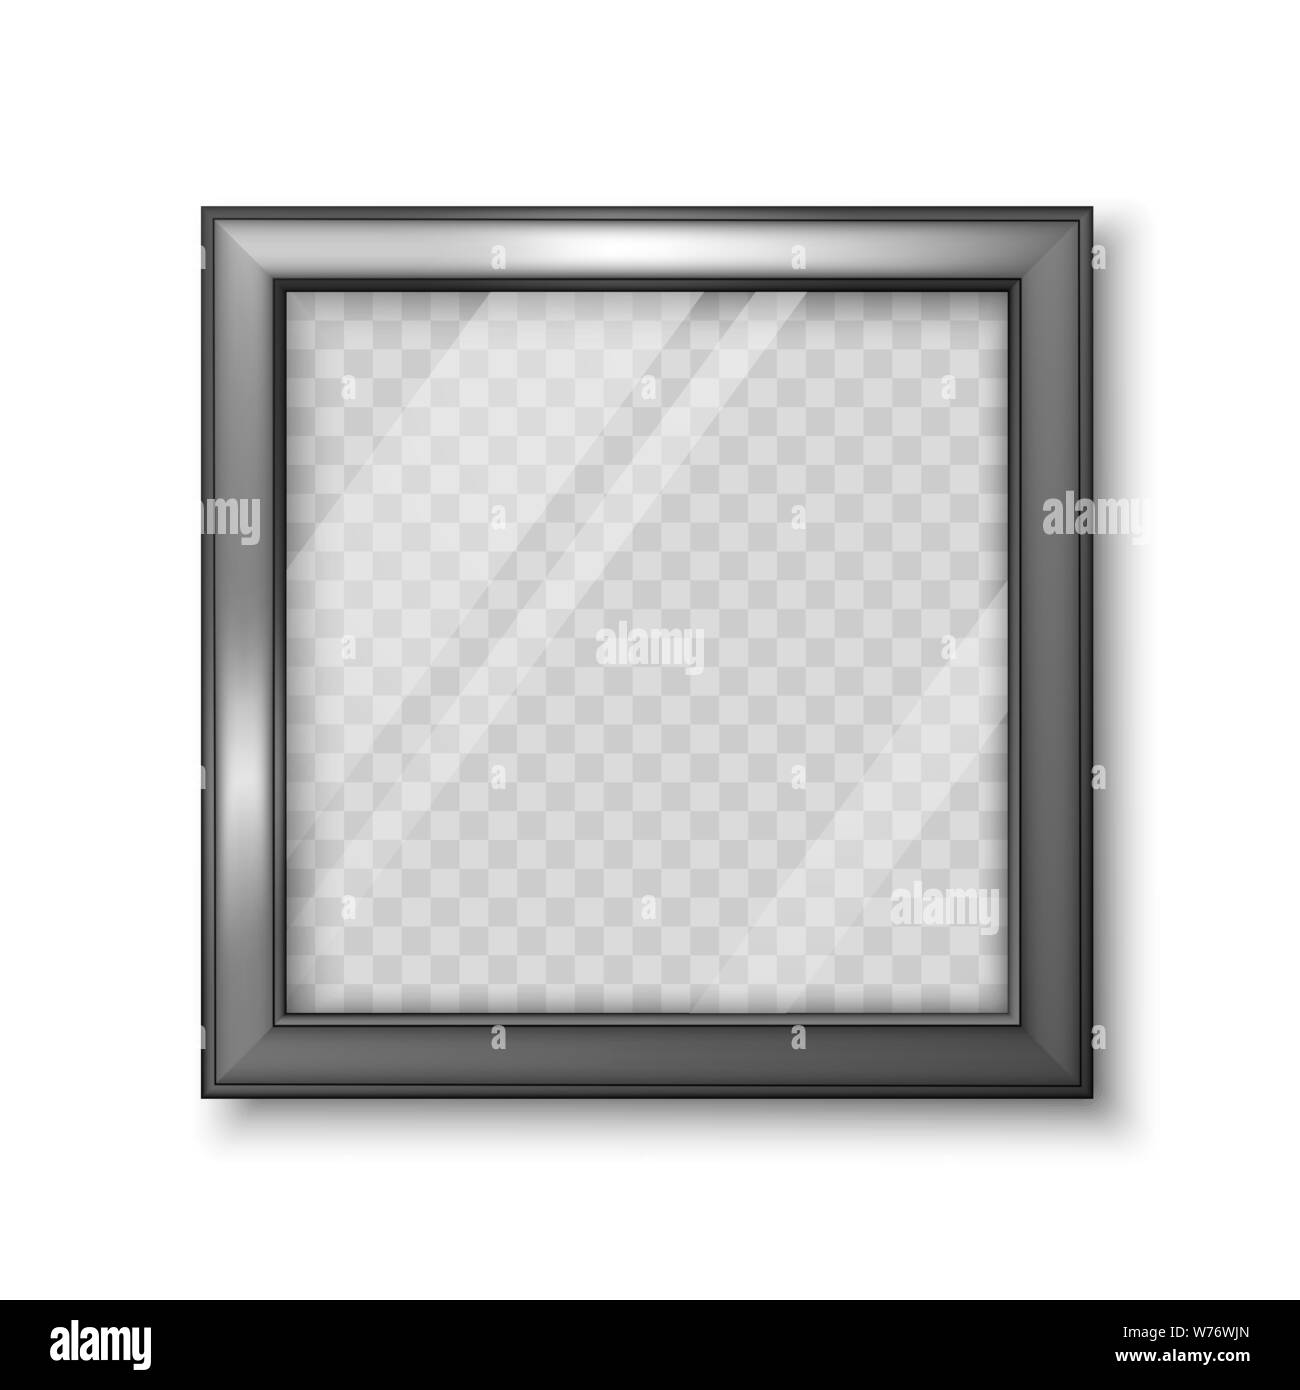 Realistic square black frame with transparent background for photo or picture. Vector illustration isolated on white background Stock Vector